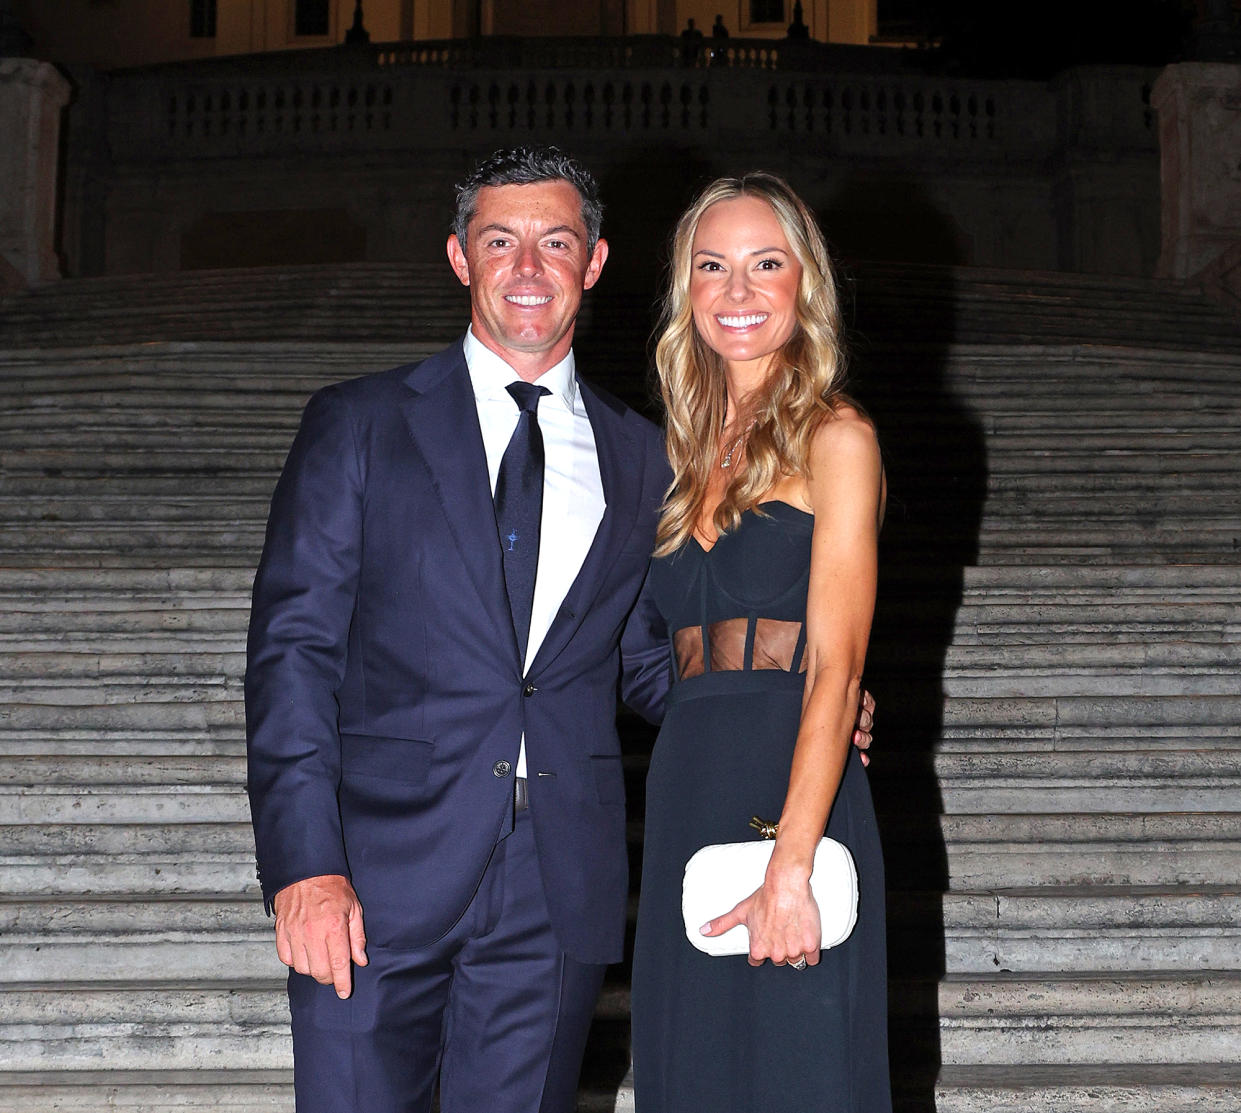 Relive Rory Mcilroy and Erica Stoll’s Star-Studded Wedding Event Before Their Divorce